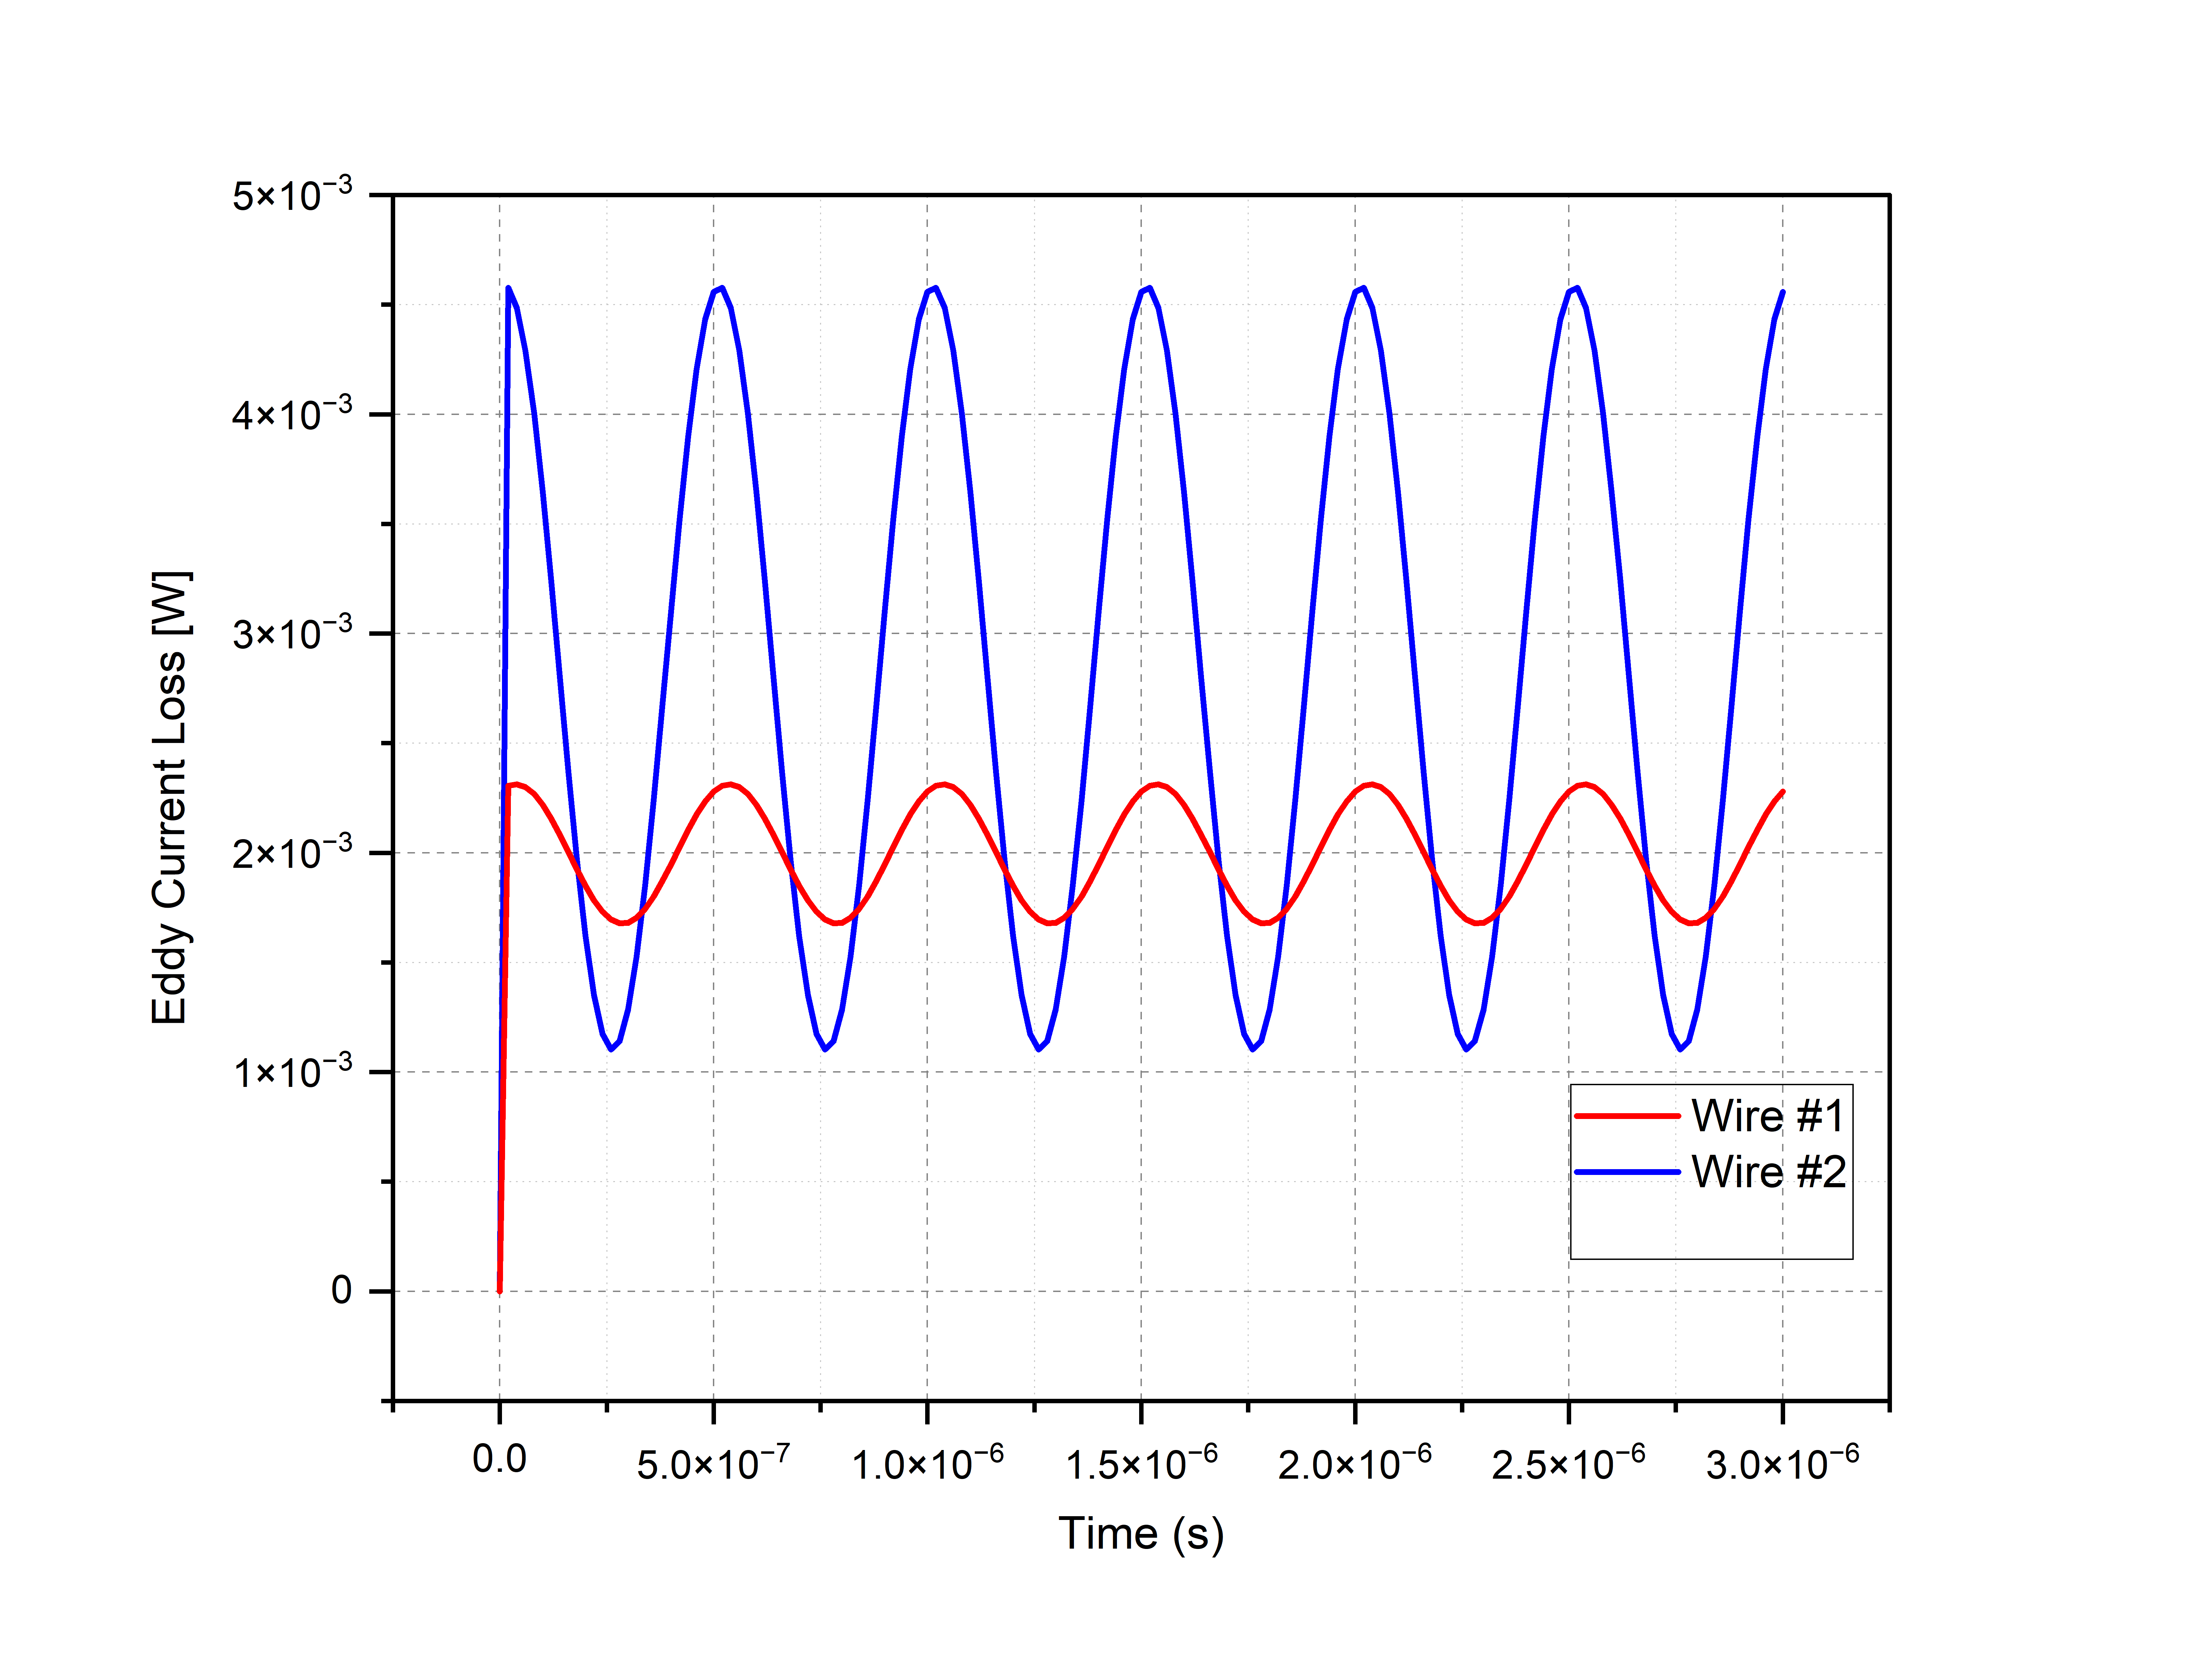 Eddy current loss of two different Litz wire configurations versus time